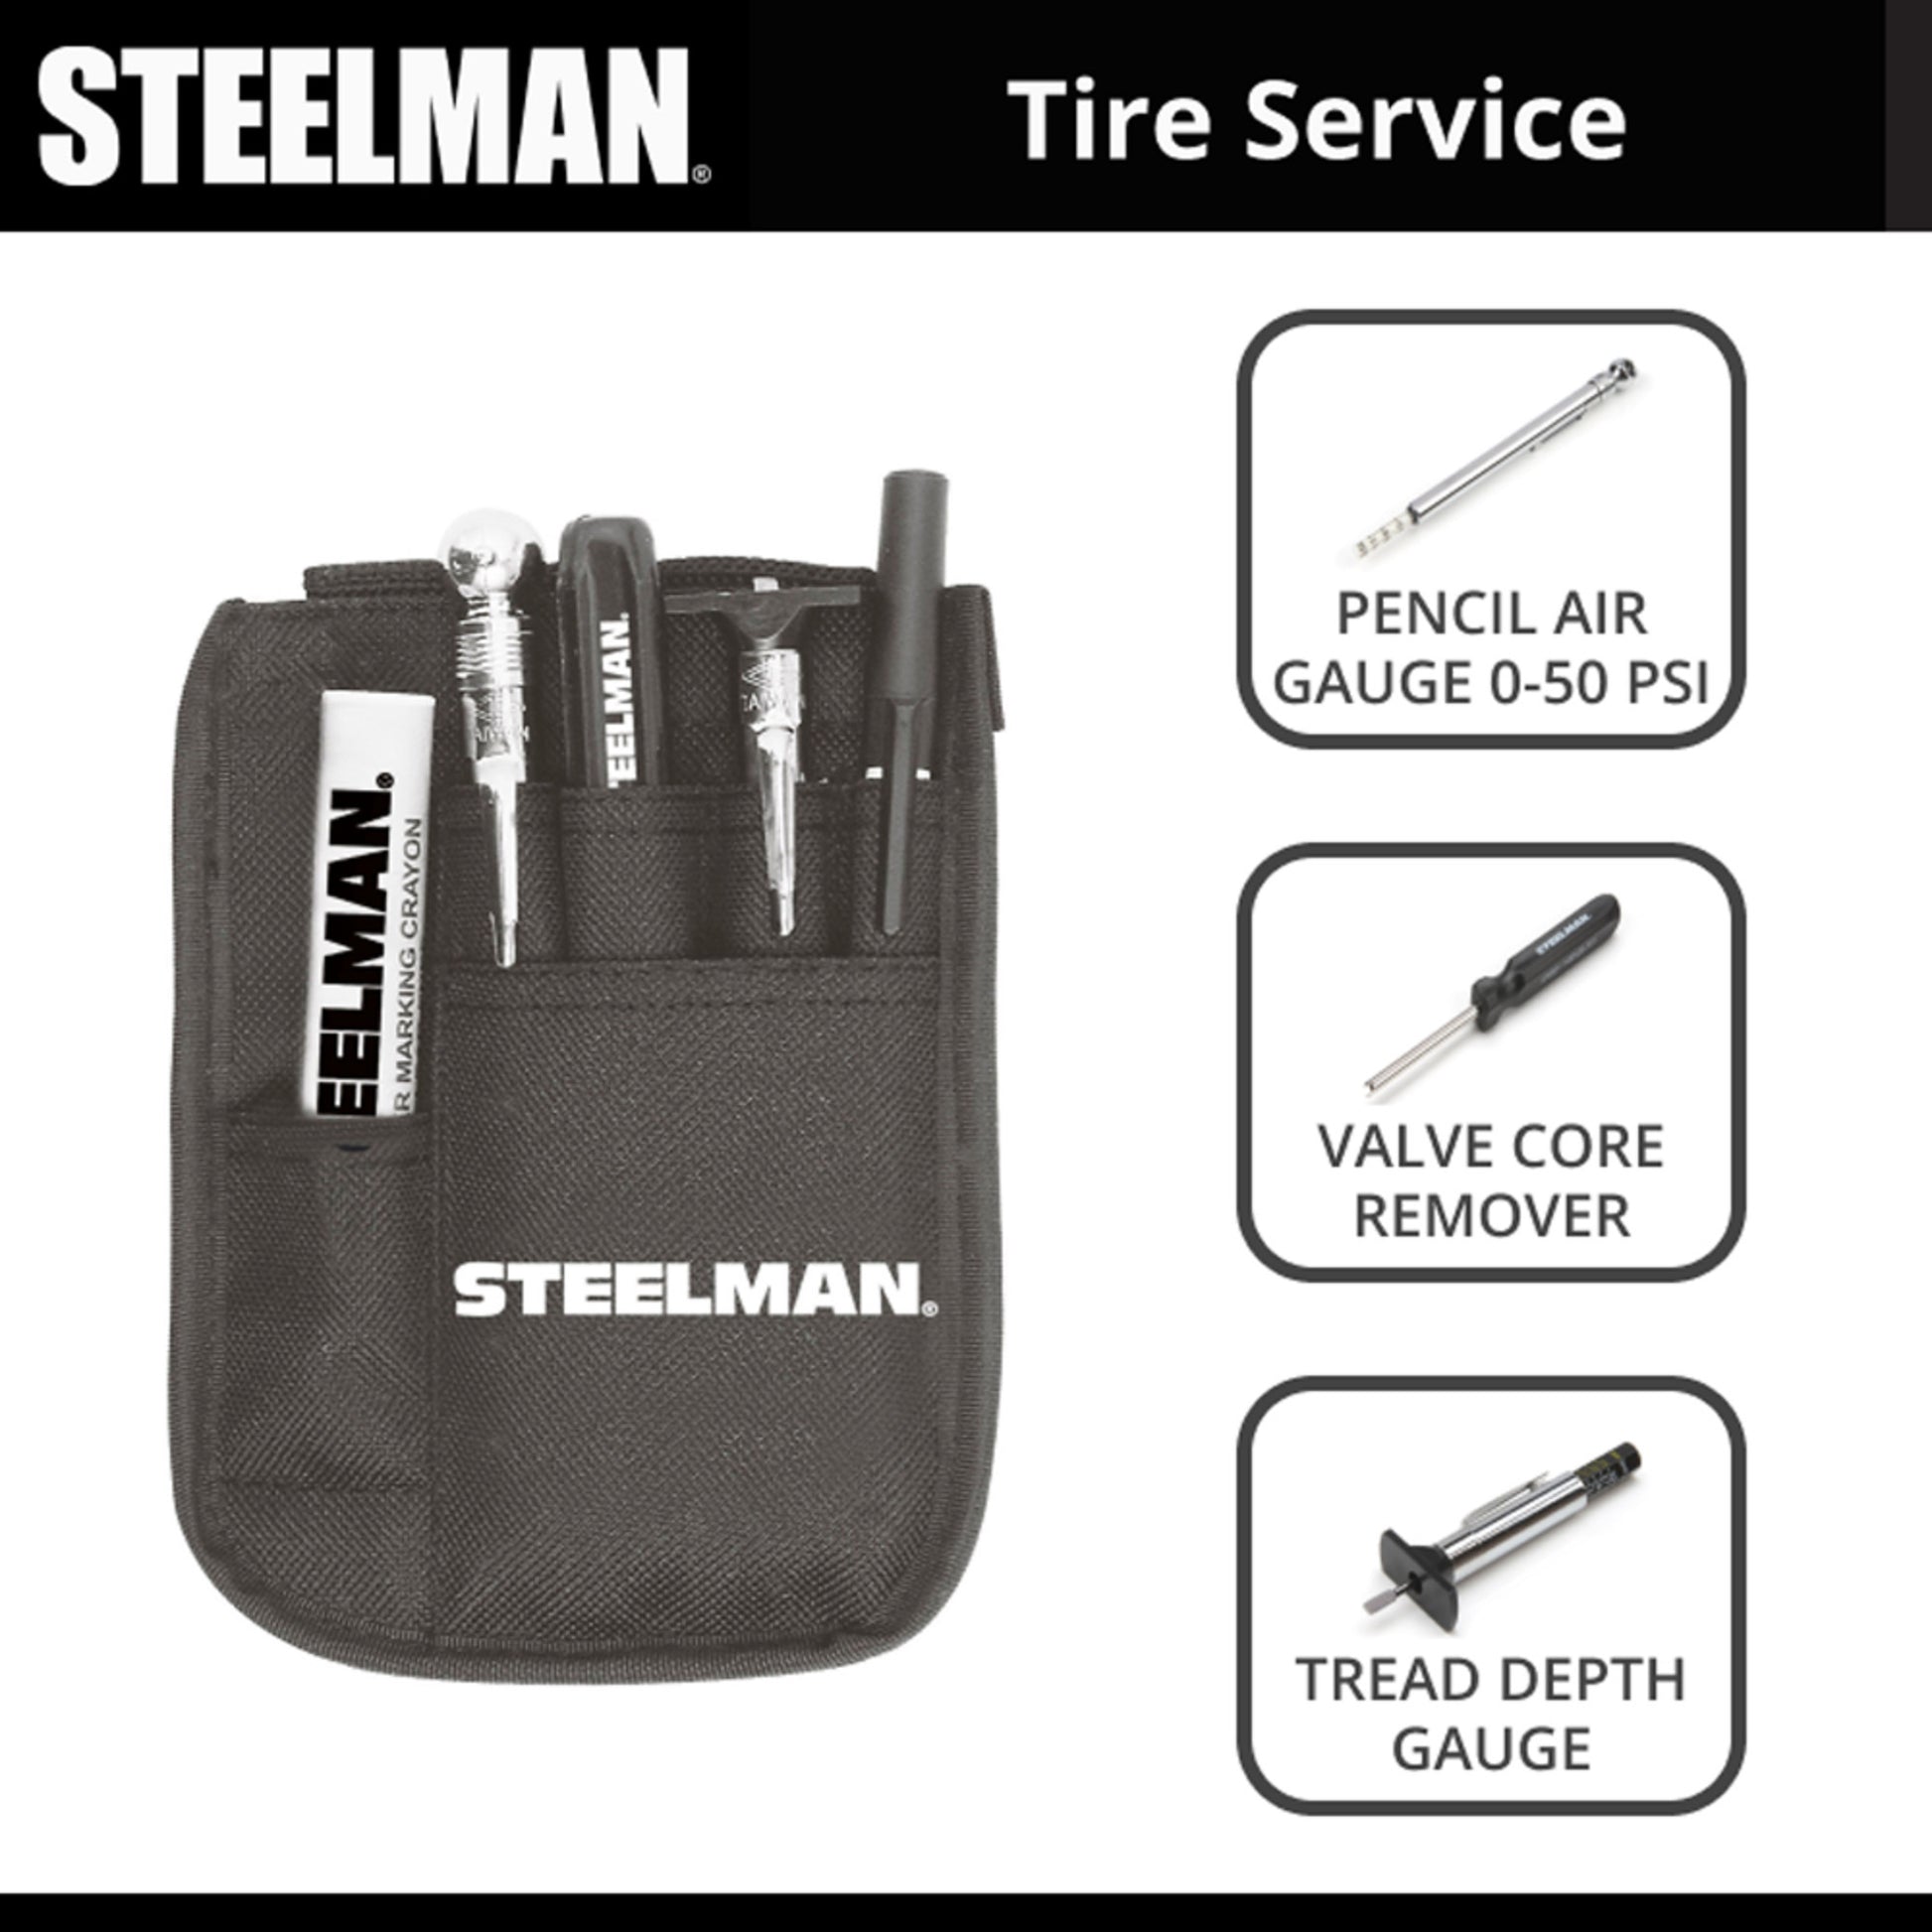 Steelman 42471 Large Silicone Tool and Hobby Tray - Tire Supply Network